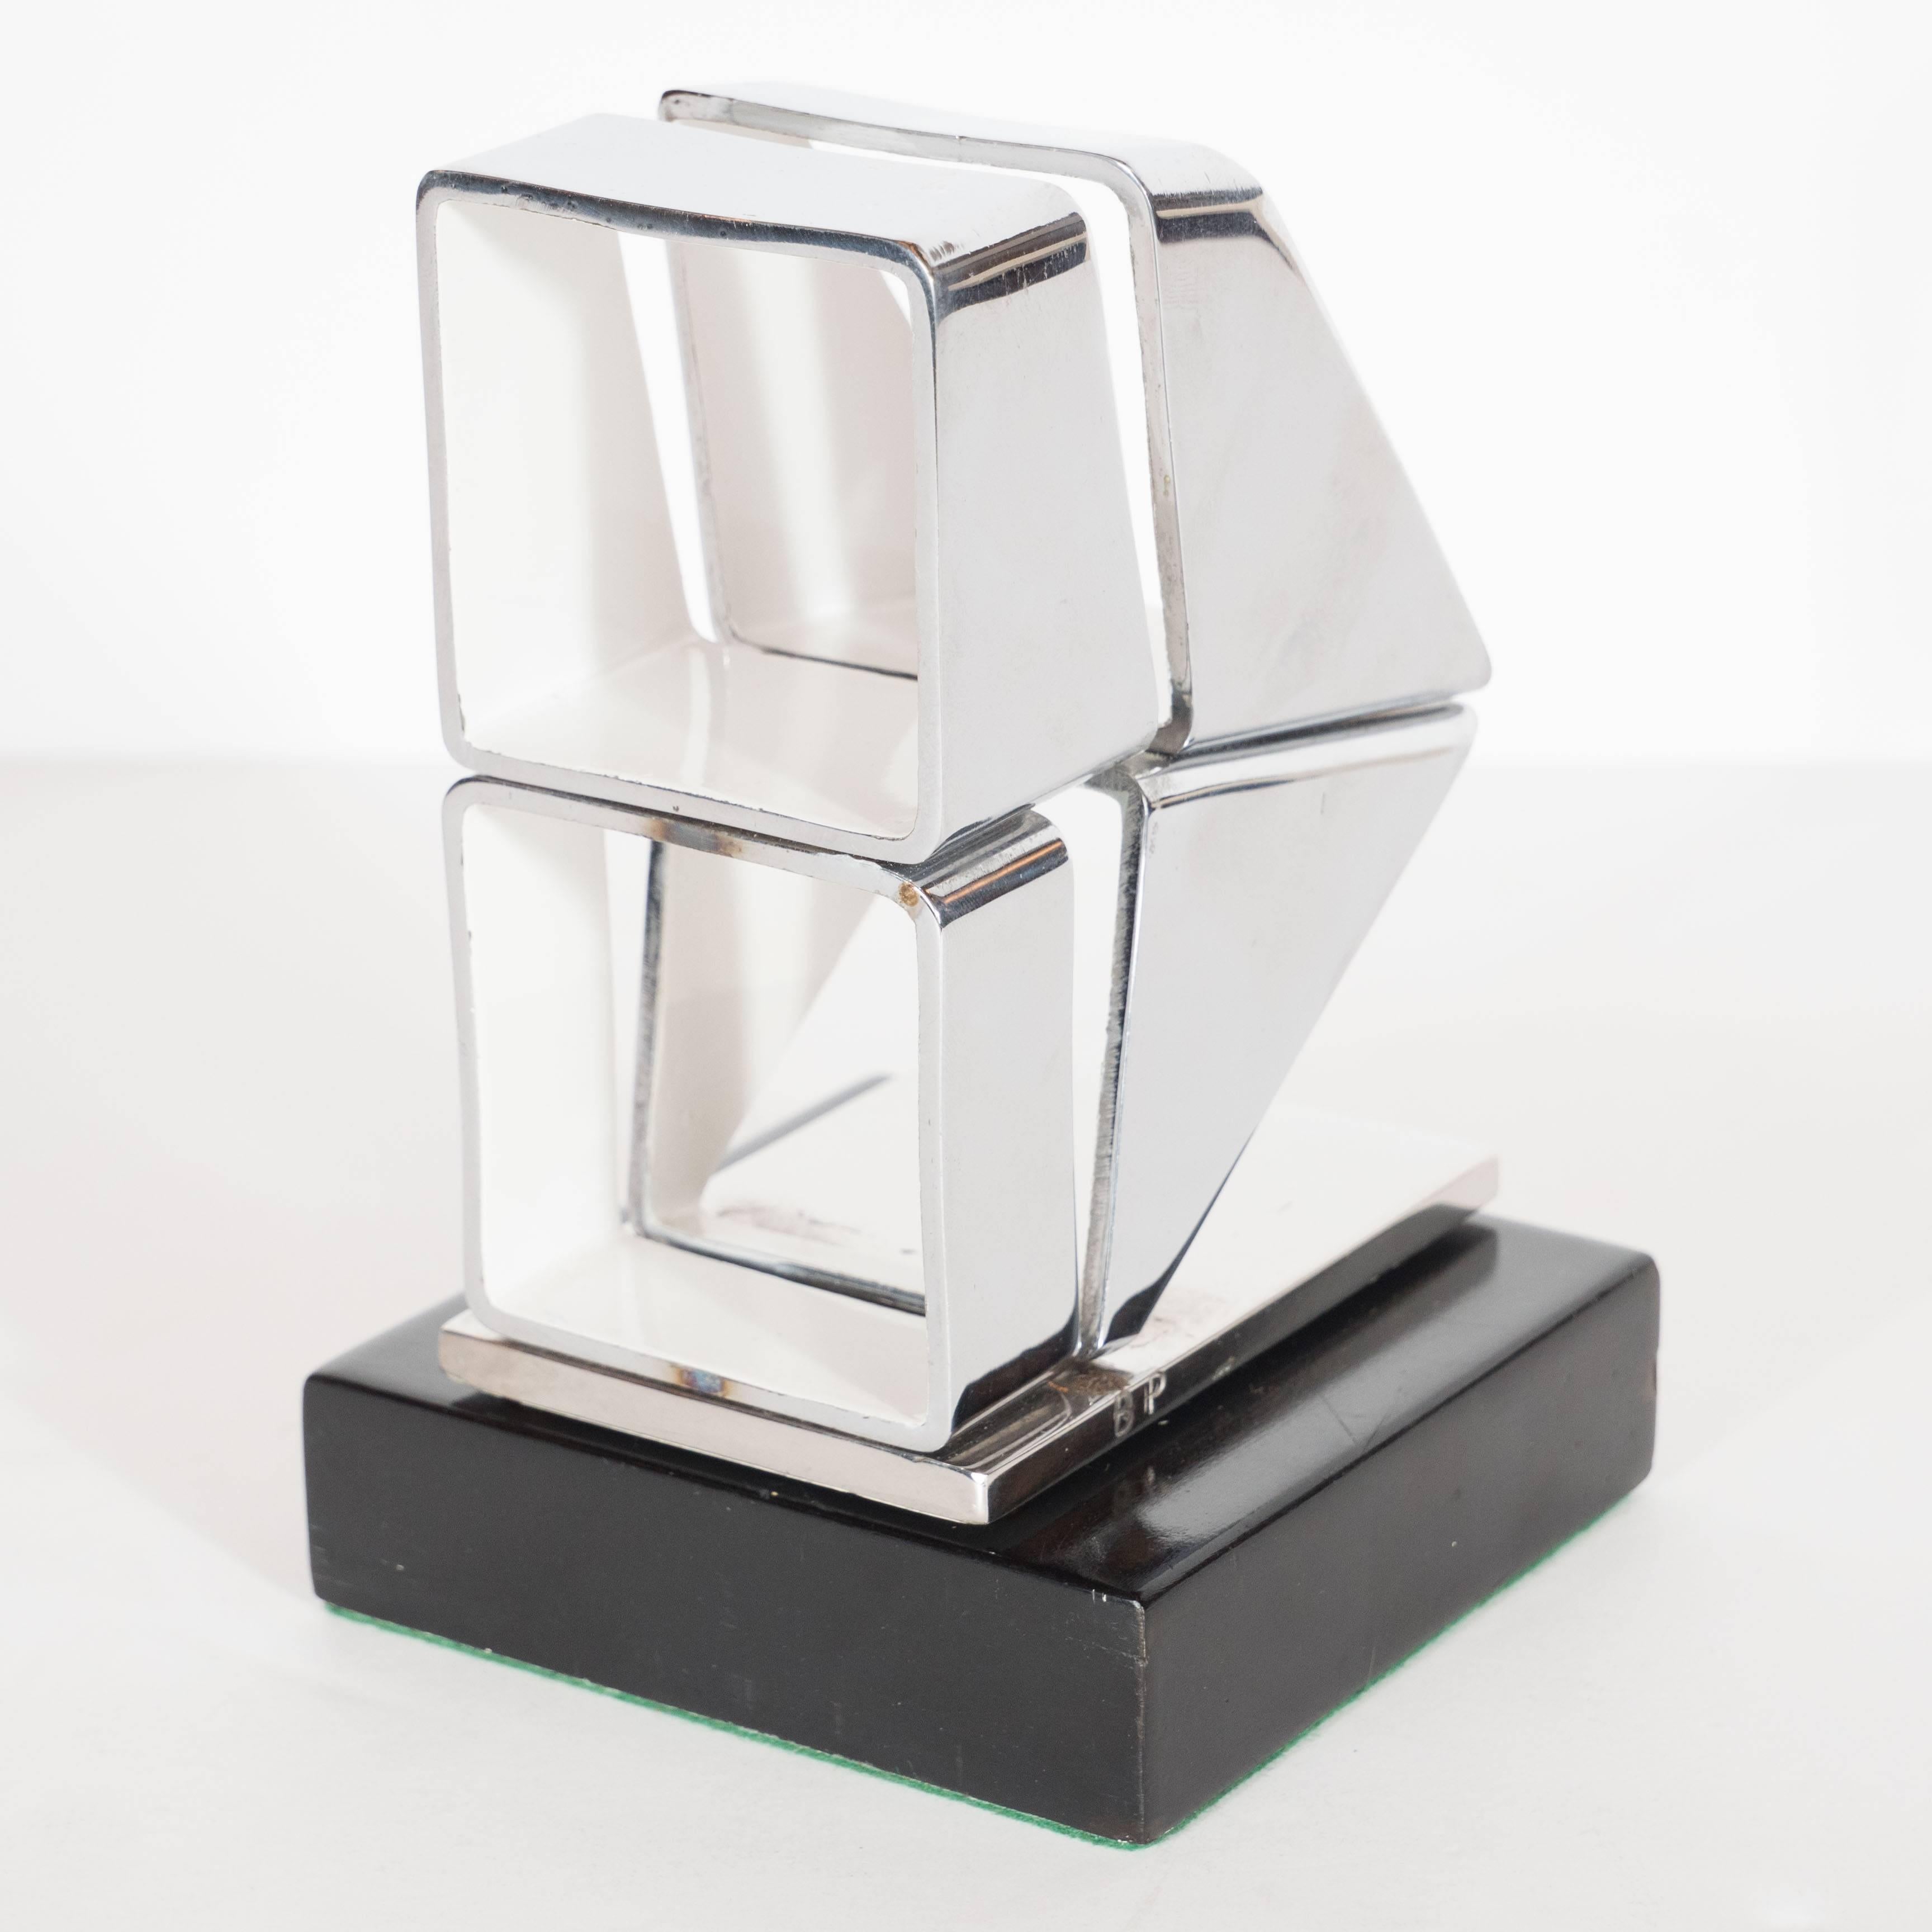 Polished Mid-Century Modernist Stainless Steel & White Enamel Sculpture by Beverly Pepper